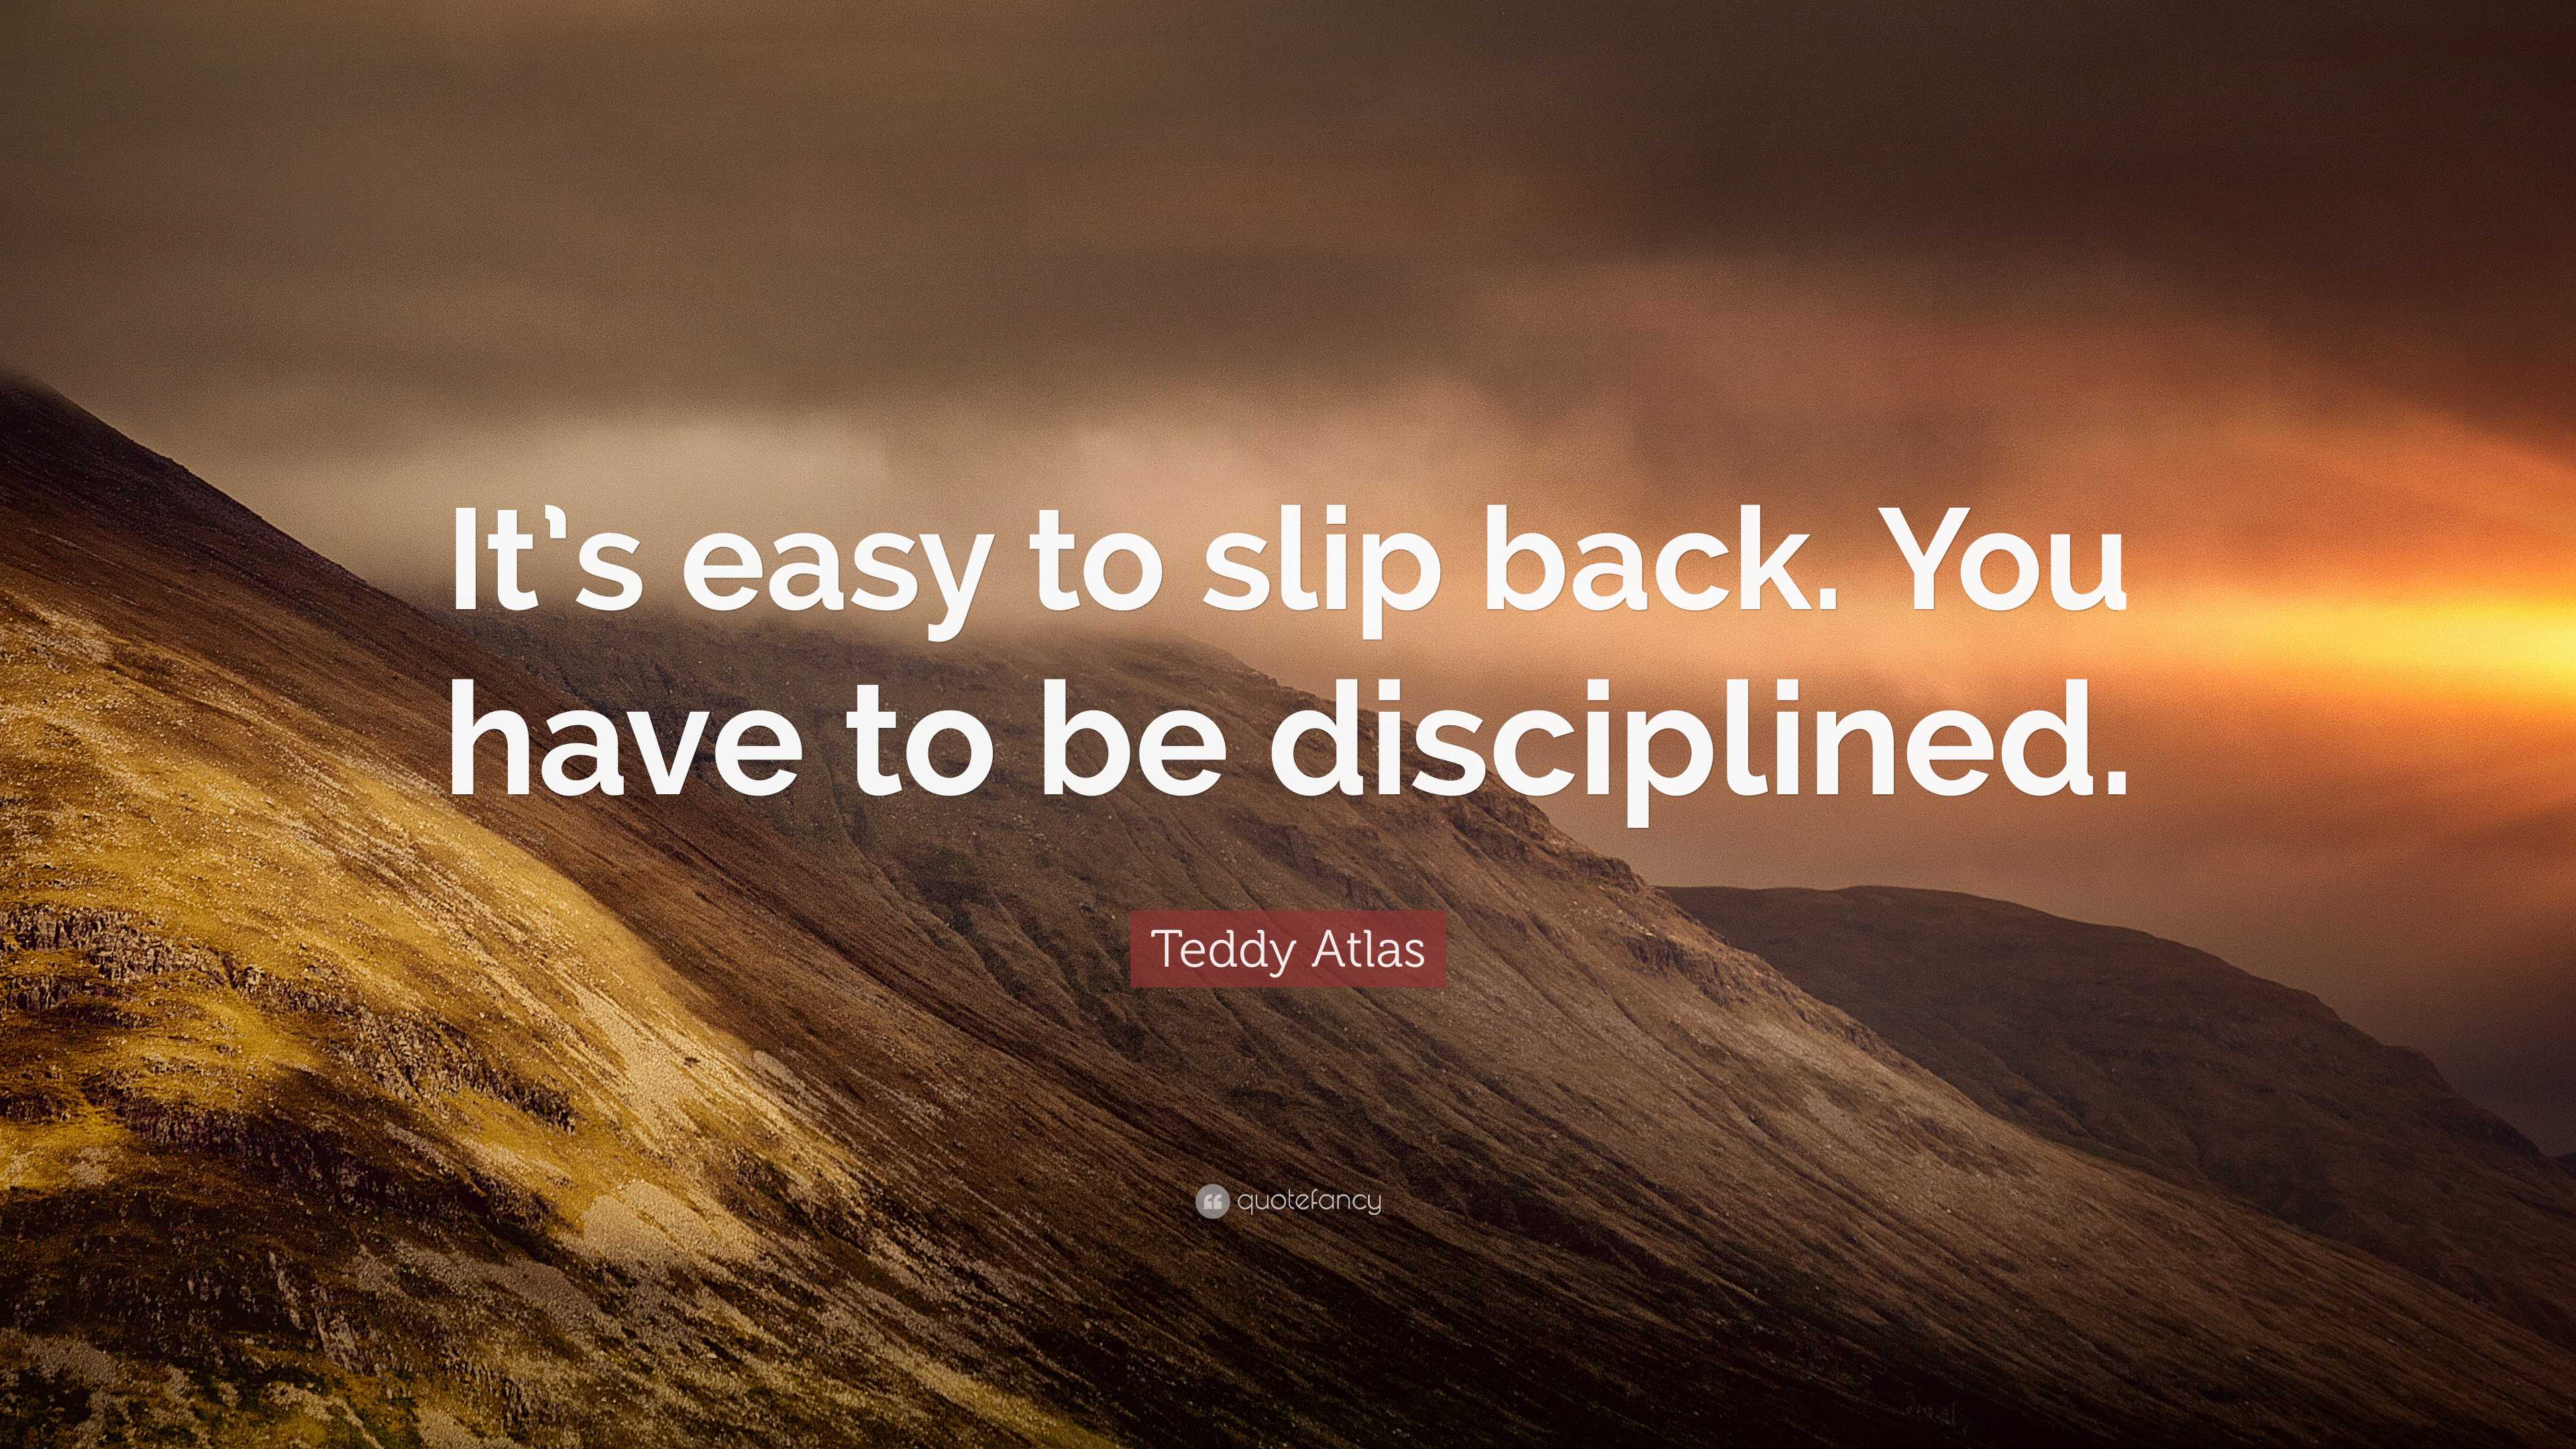 https://quotefancy.com/media/wallpaper/3840x2160/7801677-Teddy-Atlas-Quote-It-s-easy-to-slip-back-You-have-to-be.jpg